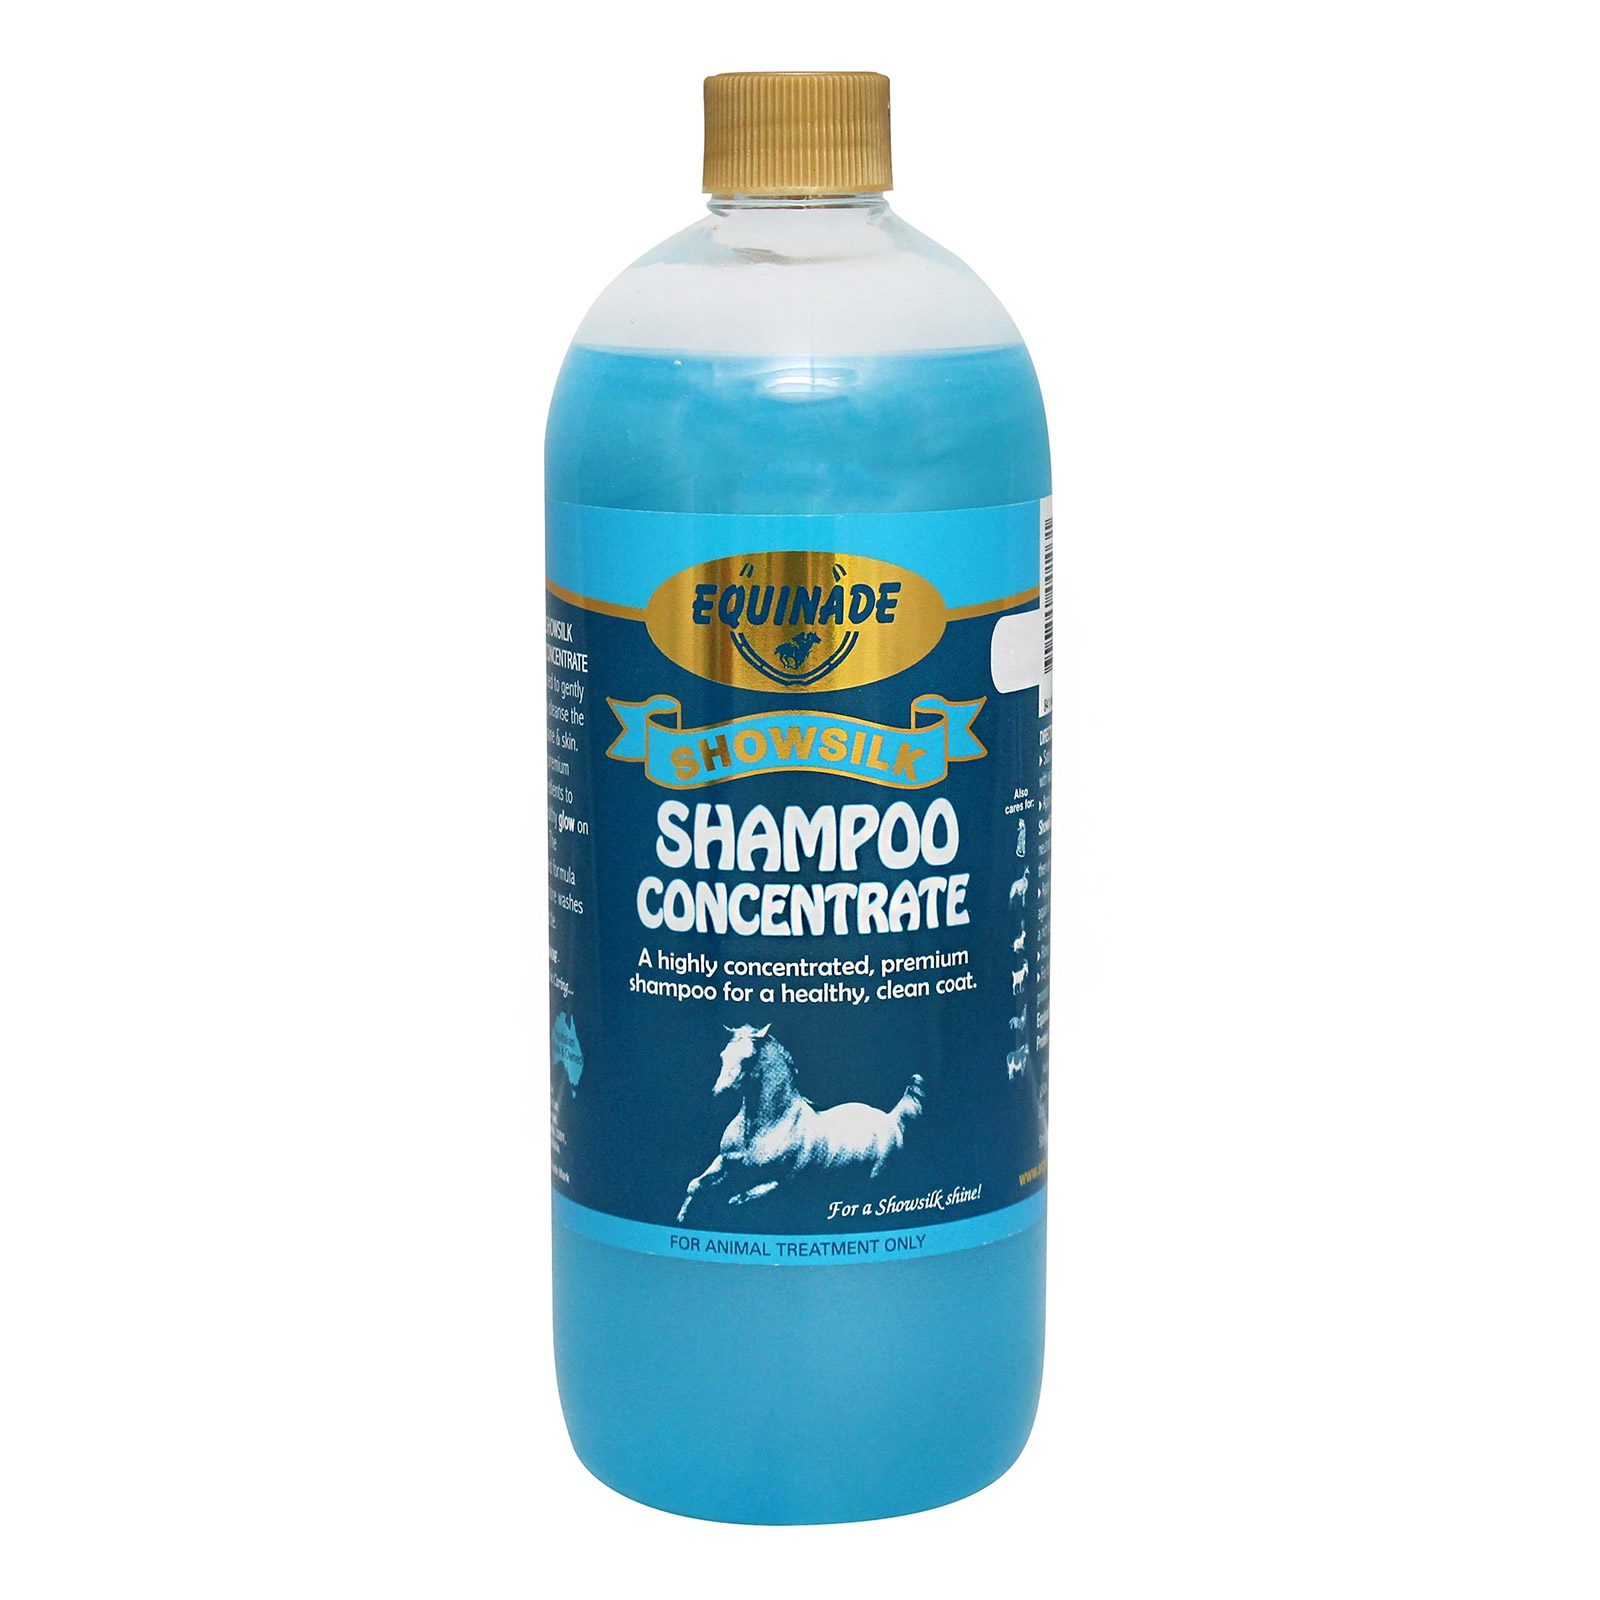 Equinade Showsilk Concentrate Shampoo for Horse